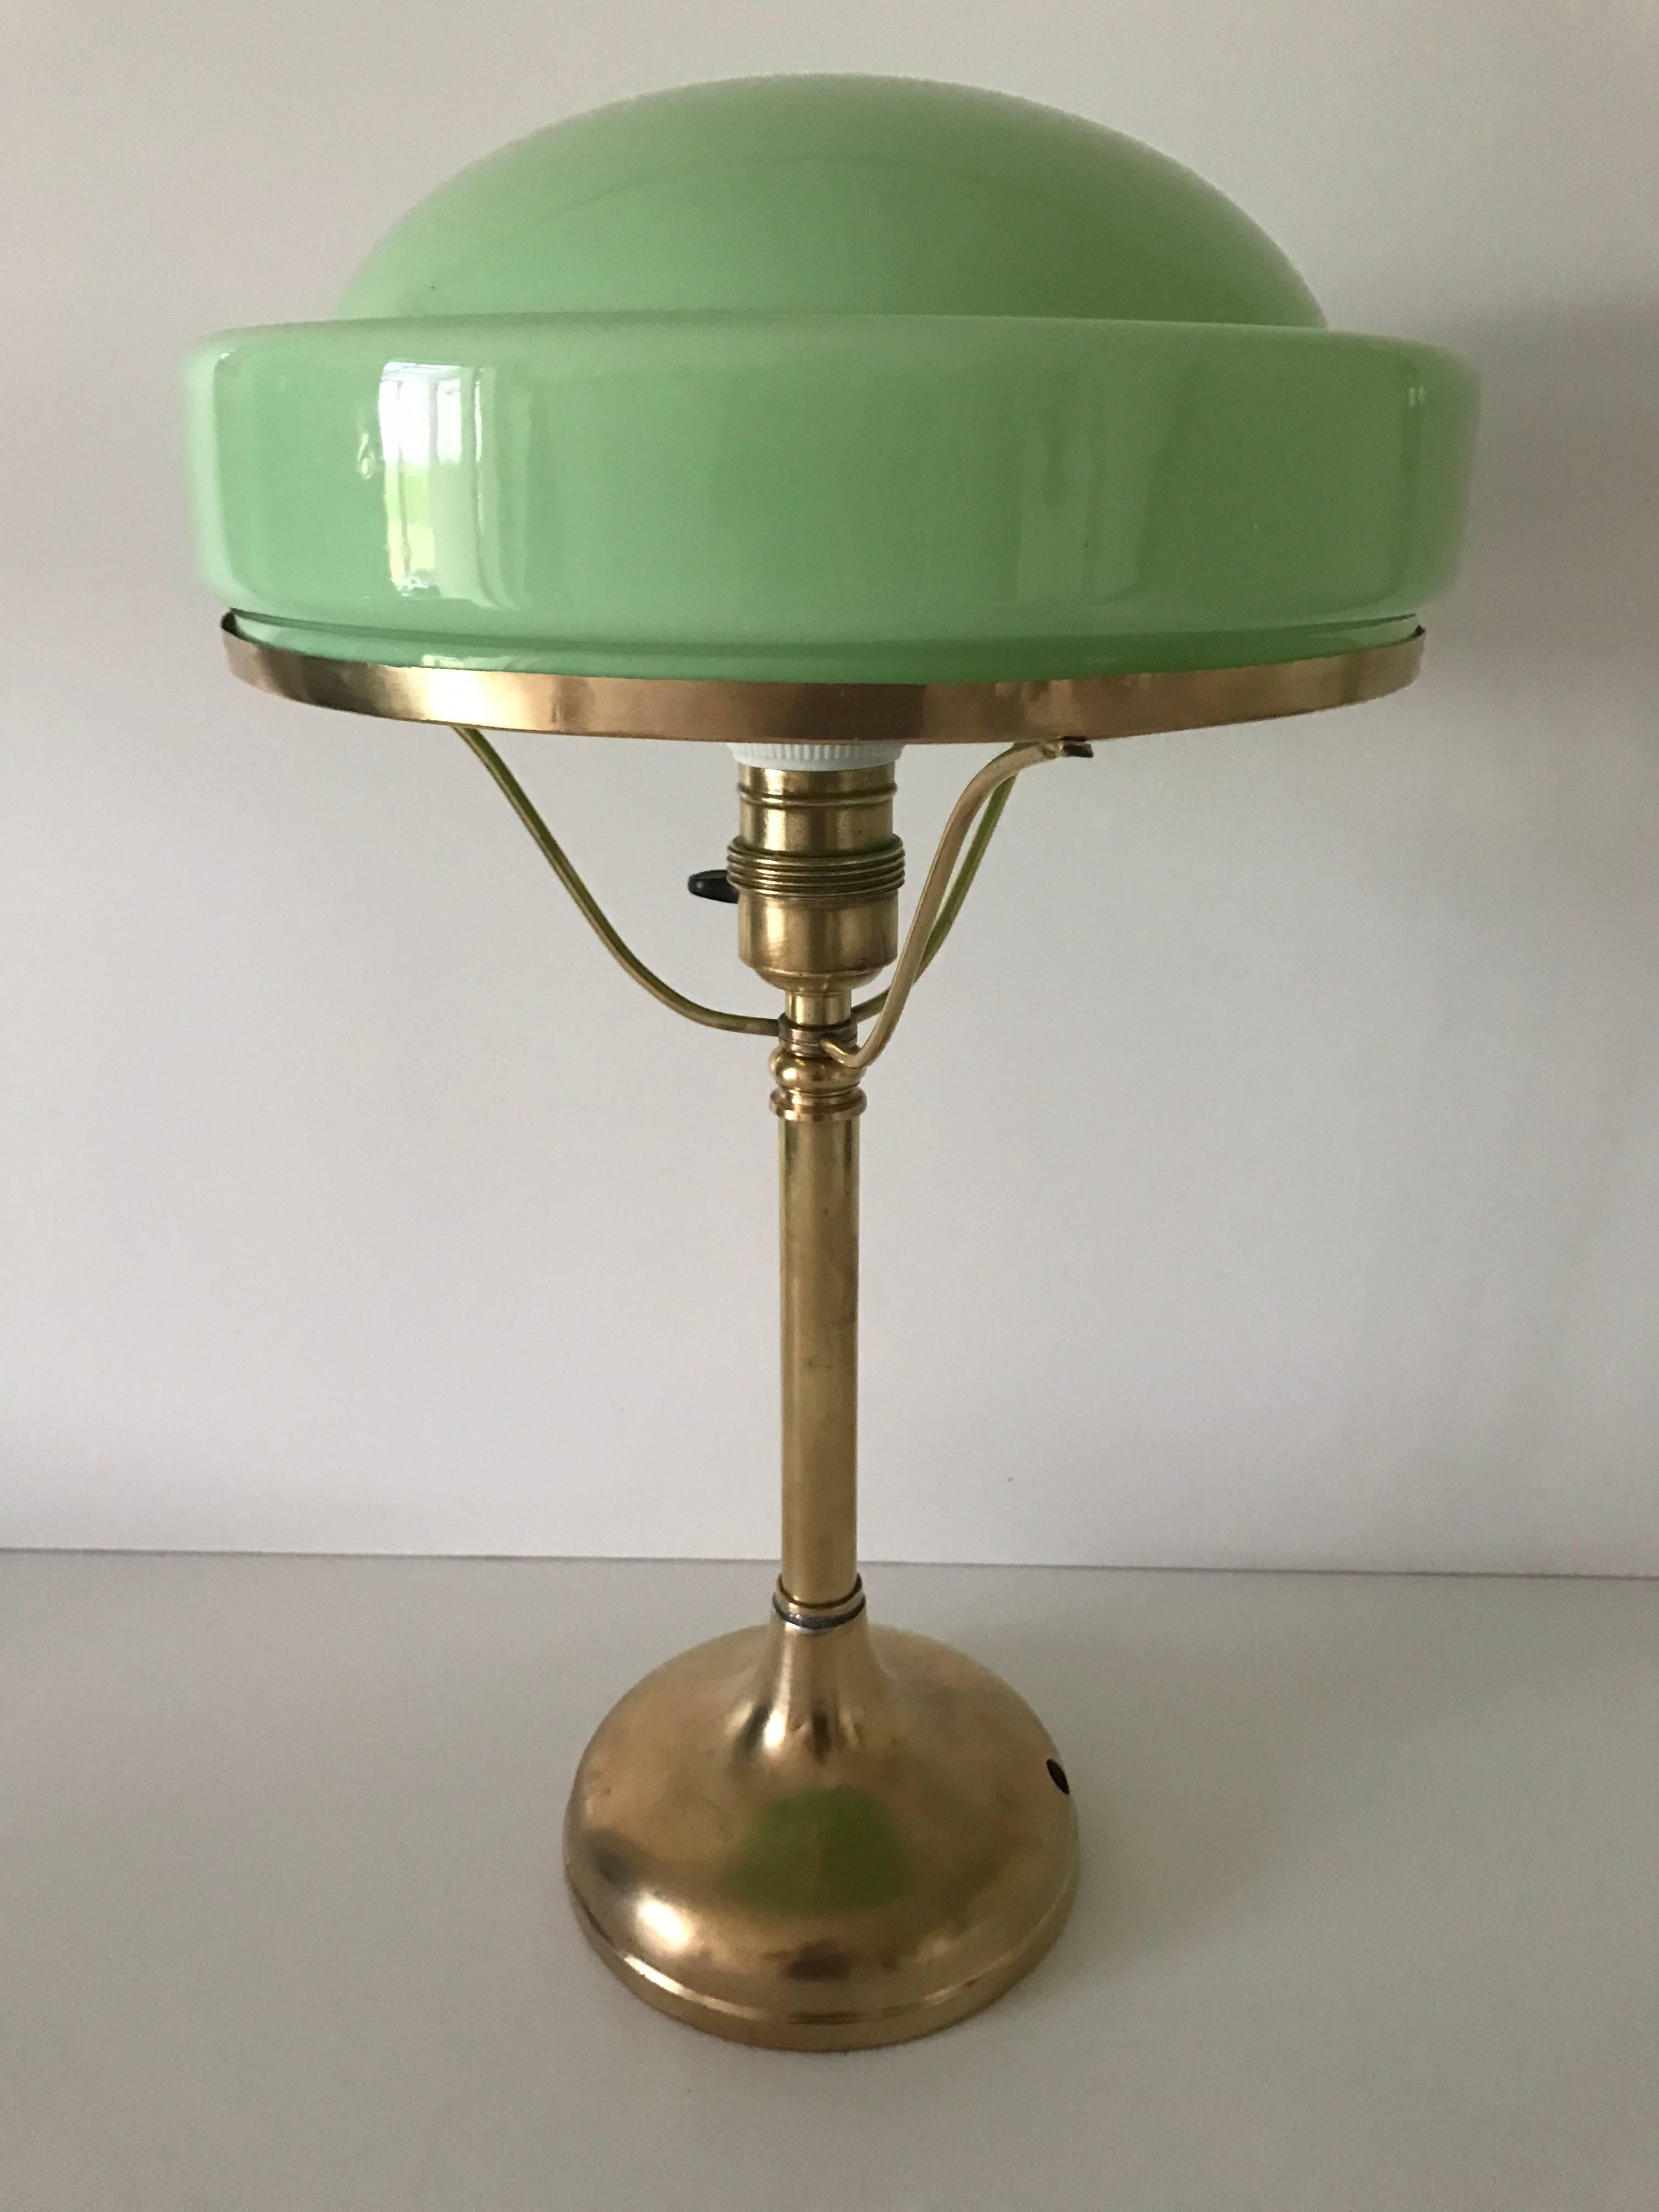 1920 Swedish Art Nouveau brass and glass table lamp by Böhlmarks.
A very nice brass table lamp most likely made at the Stockholm based Böhlmarks lamp factory and the glass shade made at Pukebergs glass factory.
The lamp is in a nice condition with